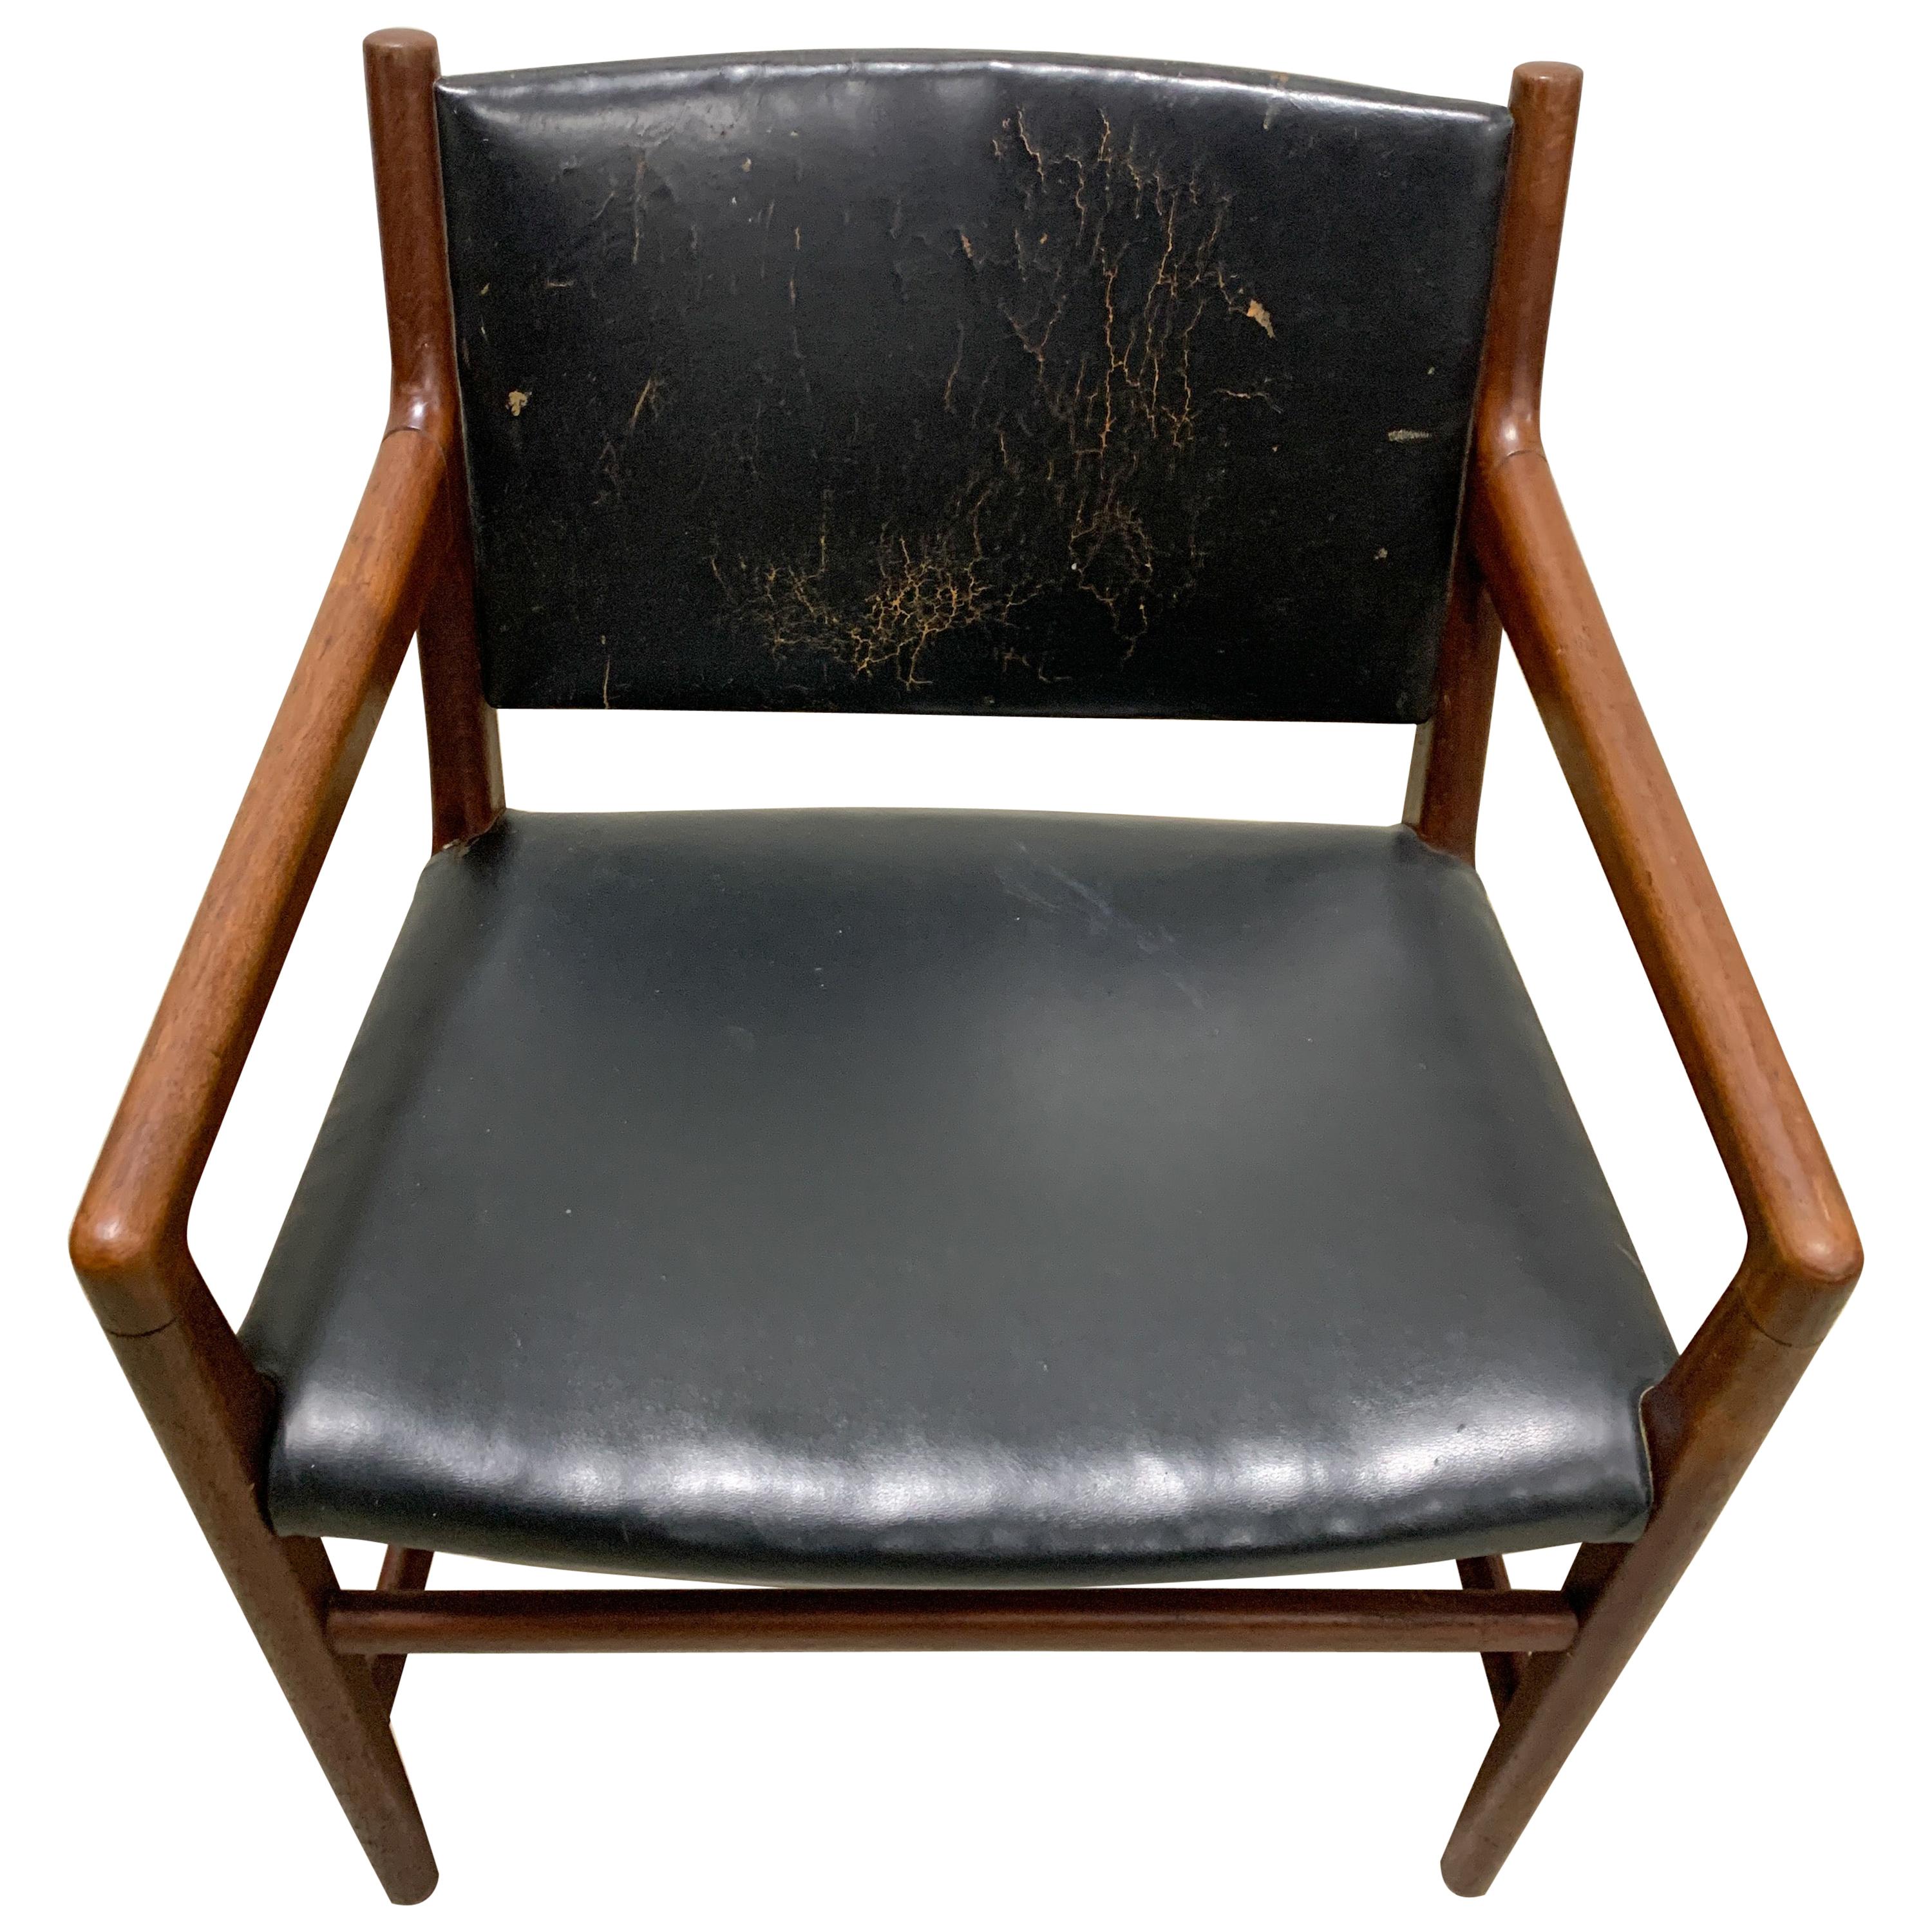 This is a very rare teak armchair designed by Hans Wegner and produced by Johannes Hansen in 1950. The JH-507 in teak and leather was only produced in limited quantities and is a hard piece to find. The chair boasts the original leather on its seat